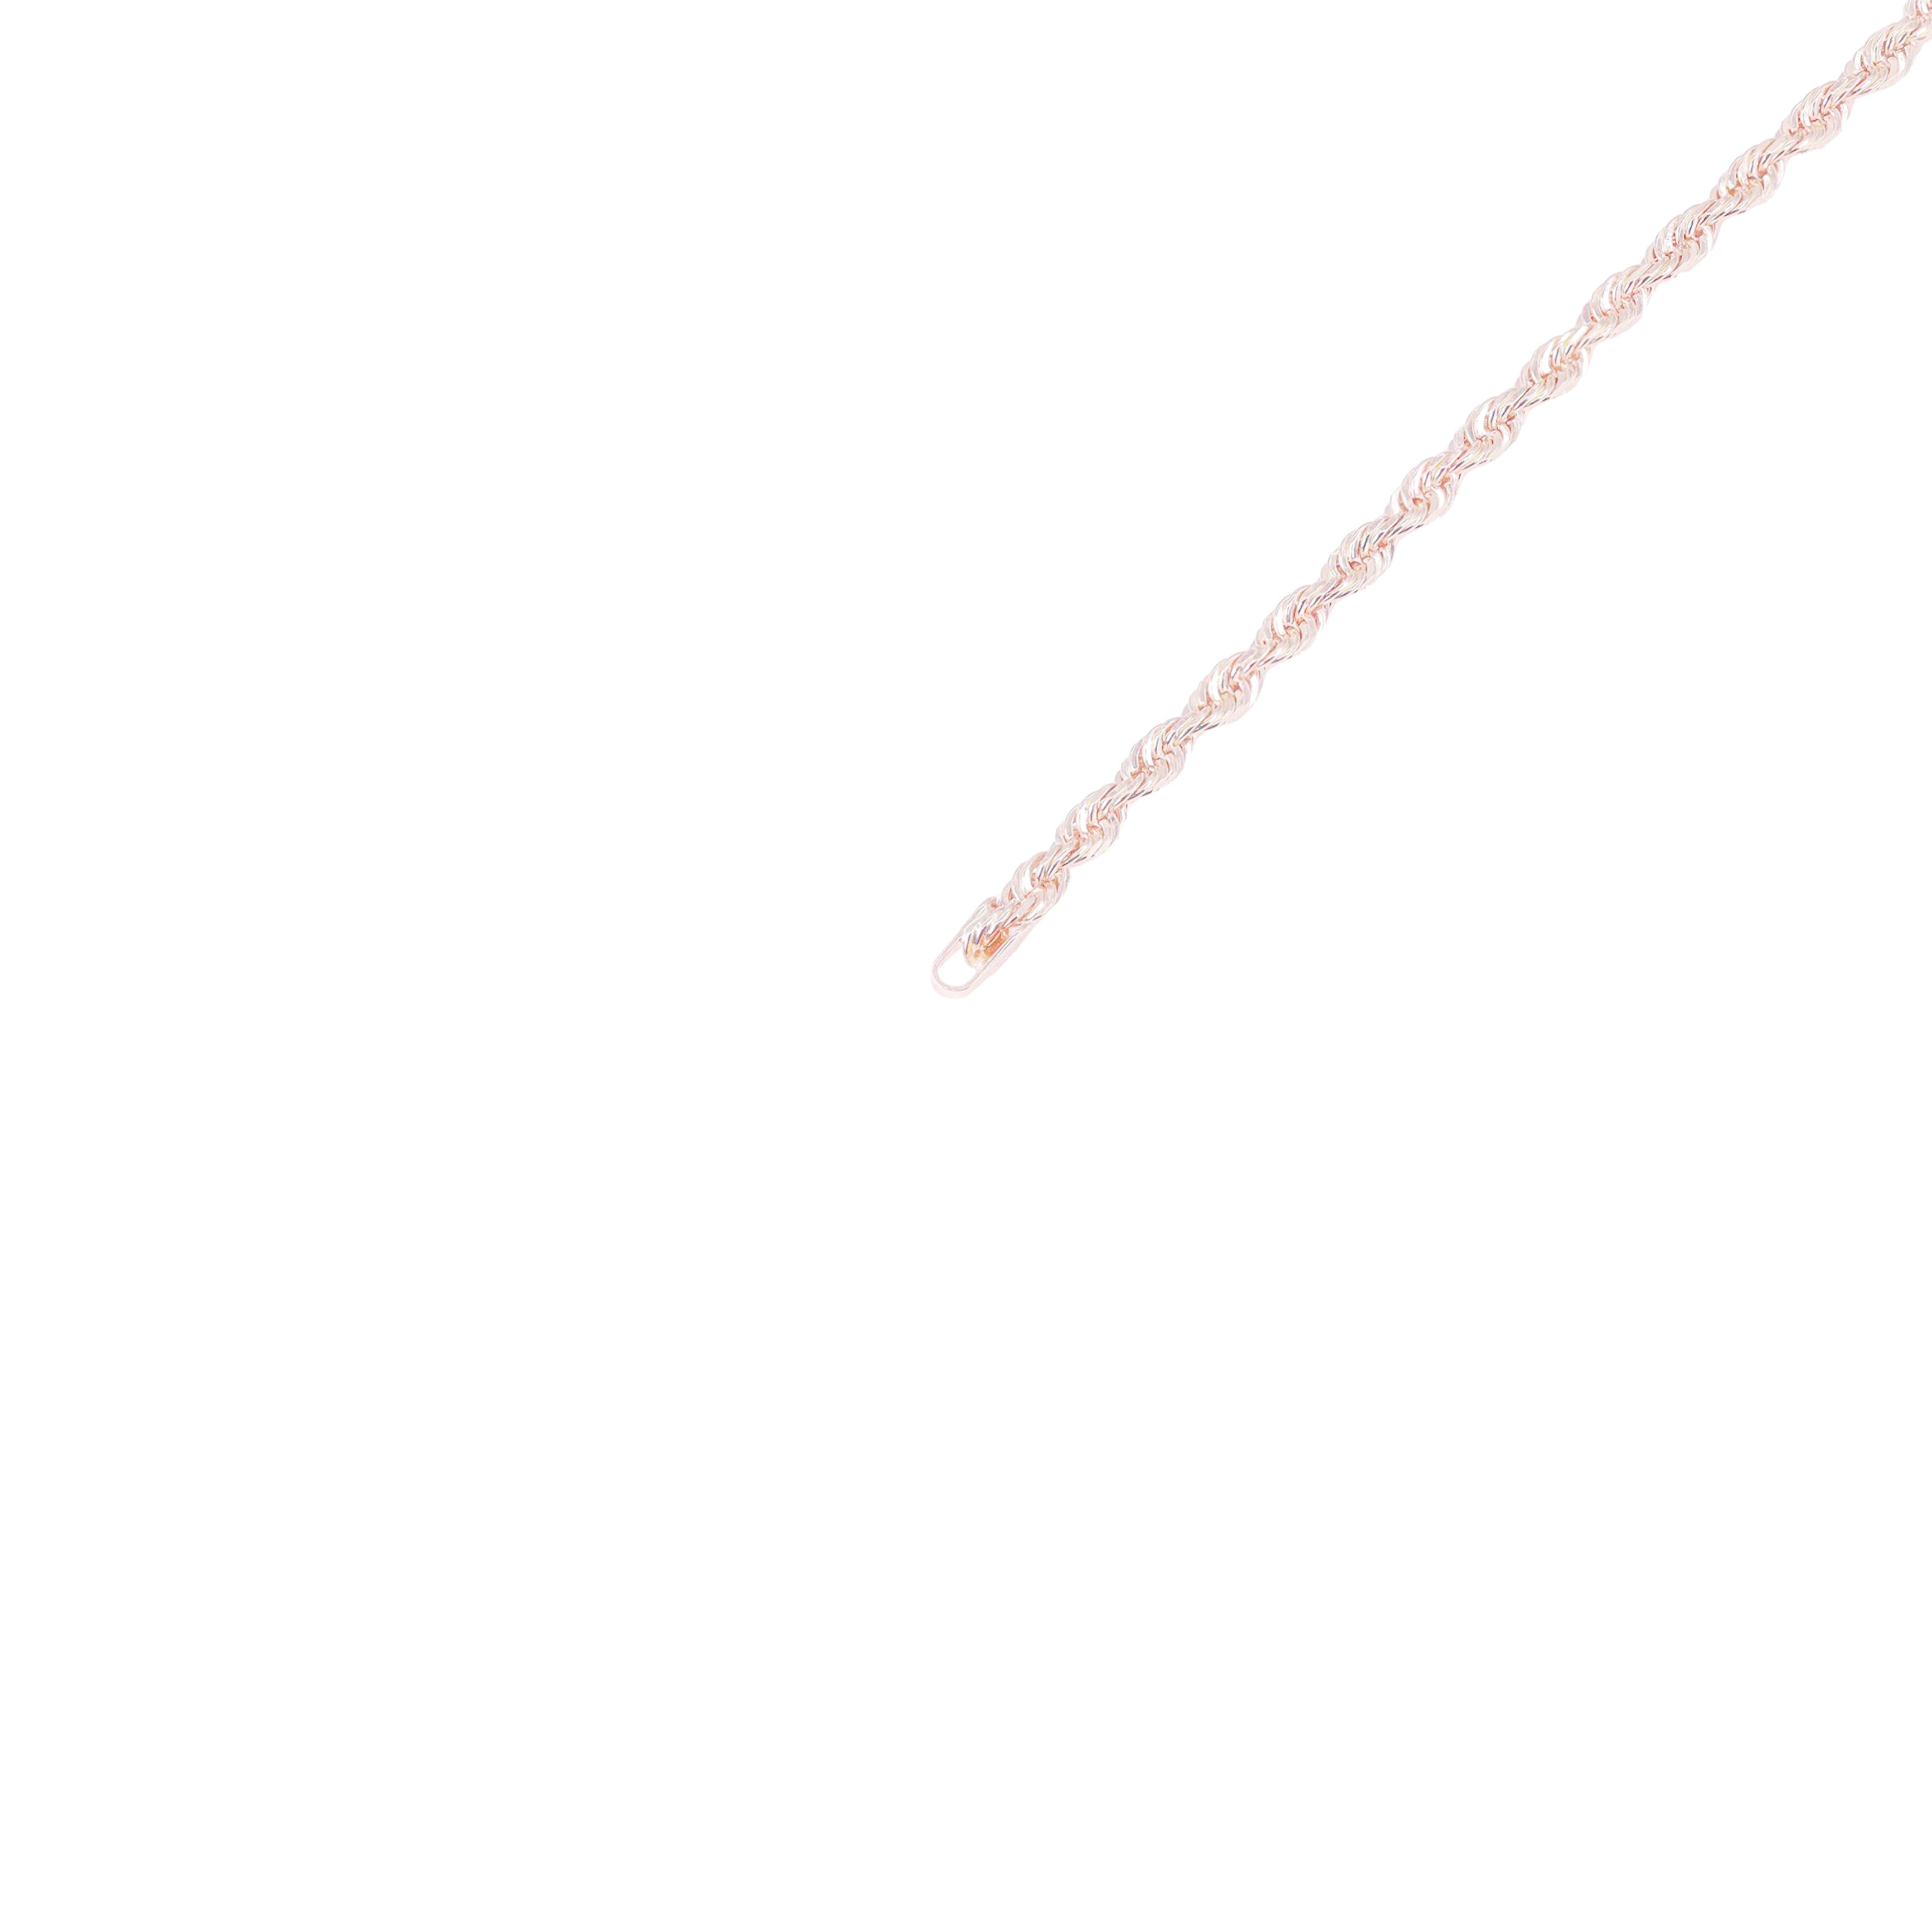 10KT Solid Rose Gold Rope Chain